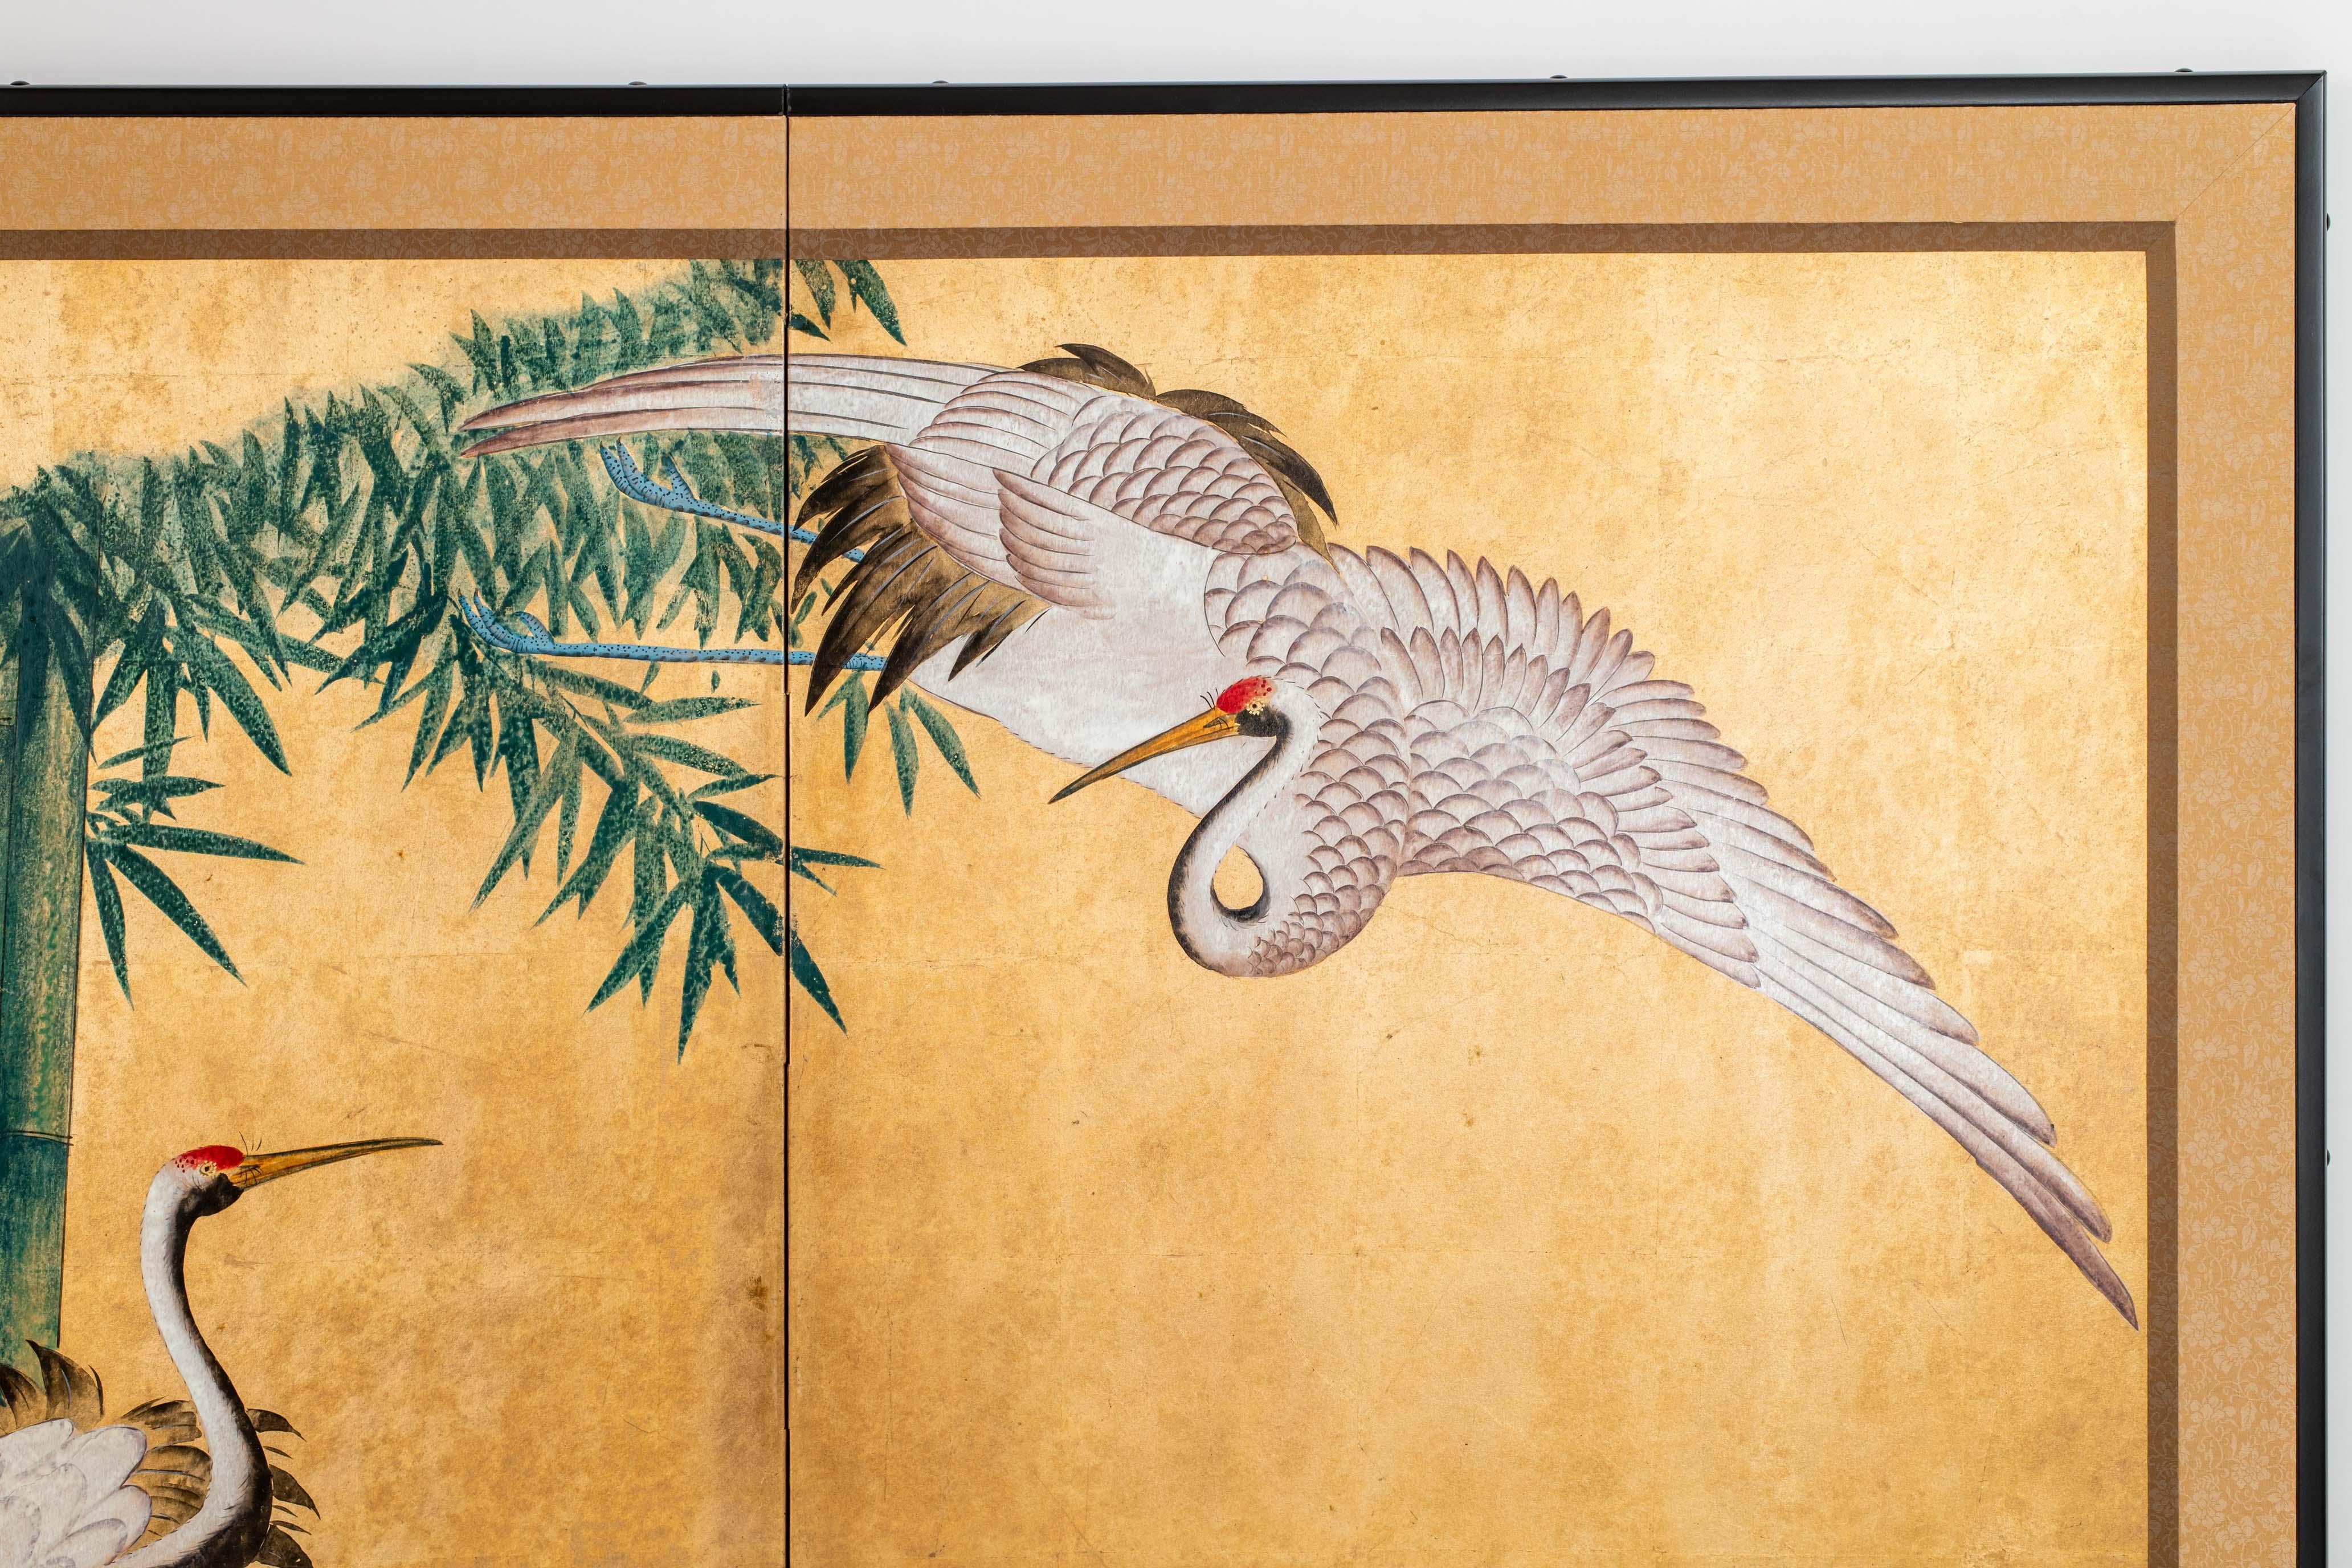 Hand-Crafted Contemporary Hand-Painted Japanese Screen of Cranes by the River